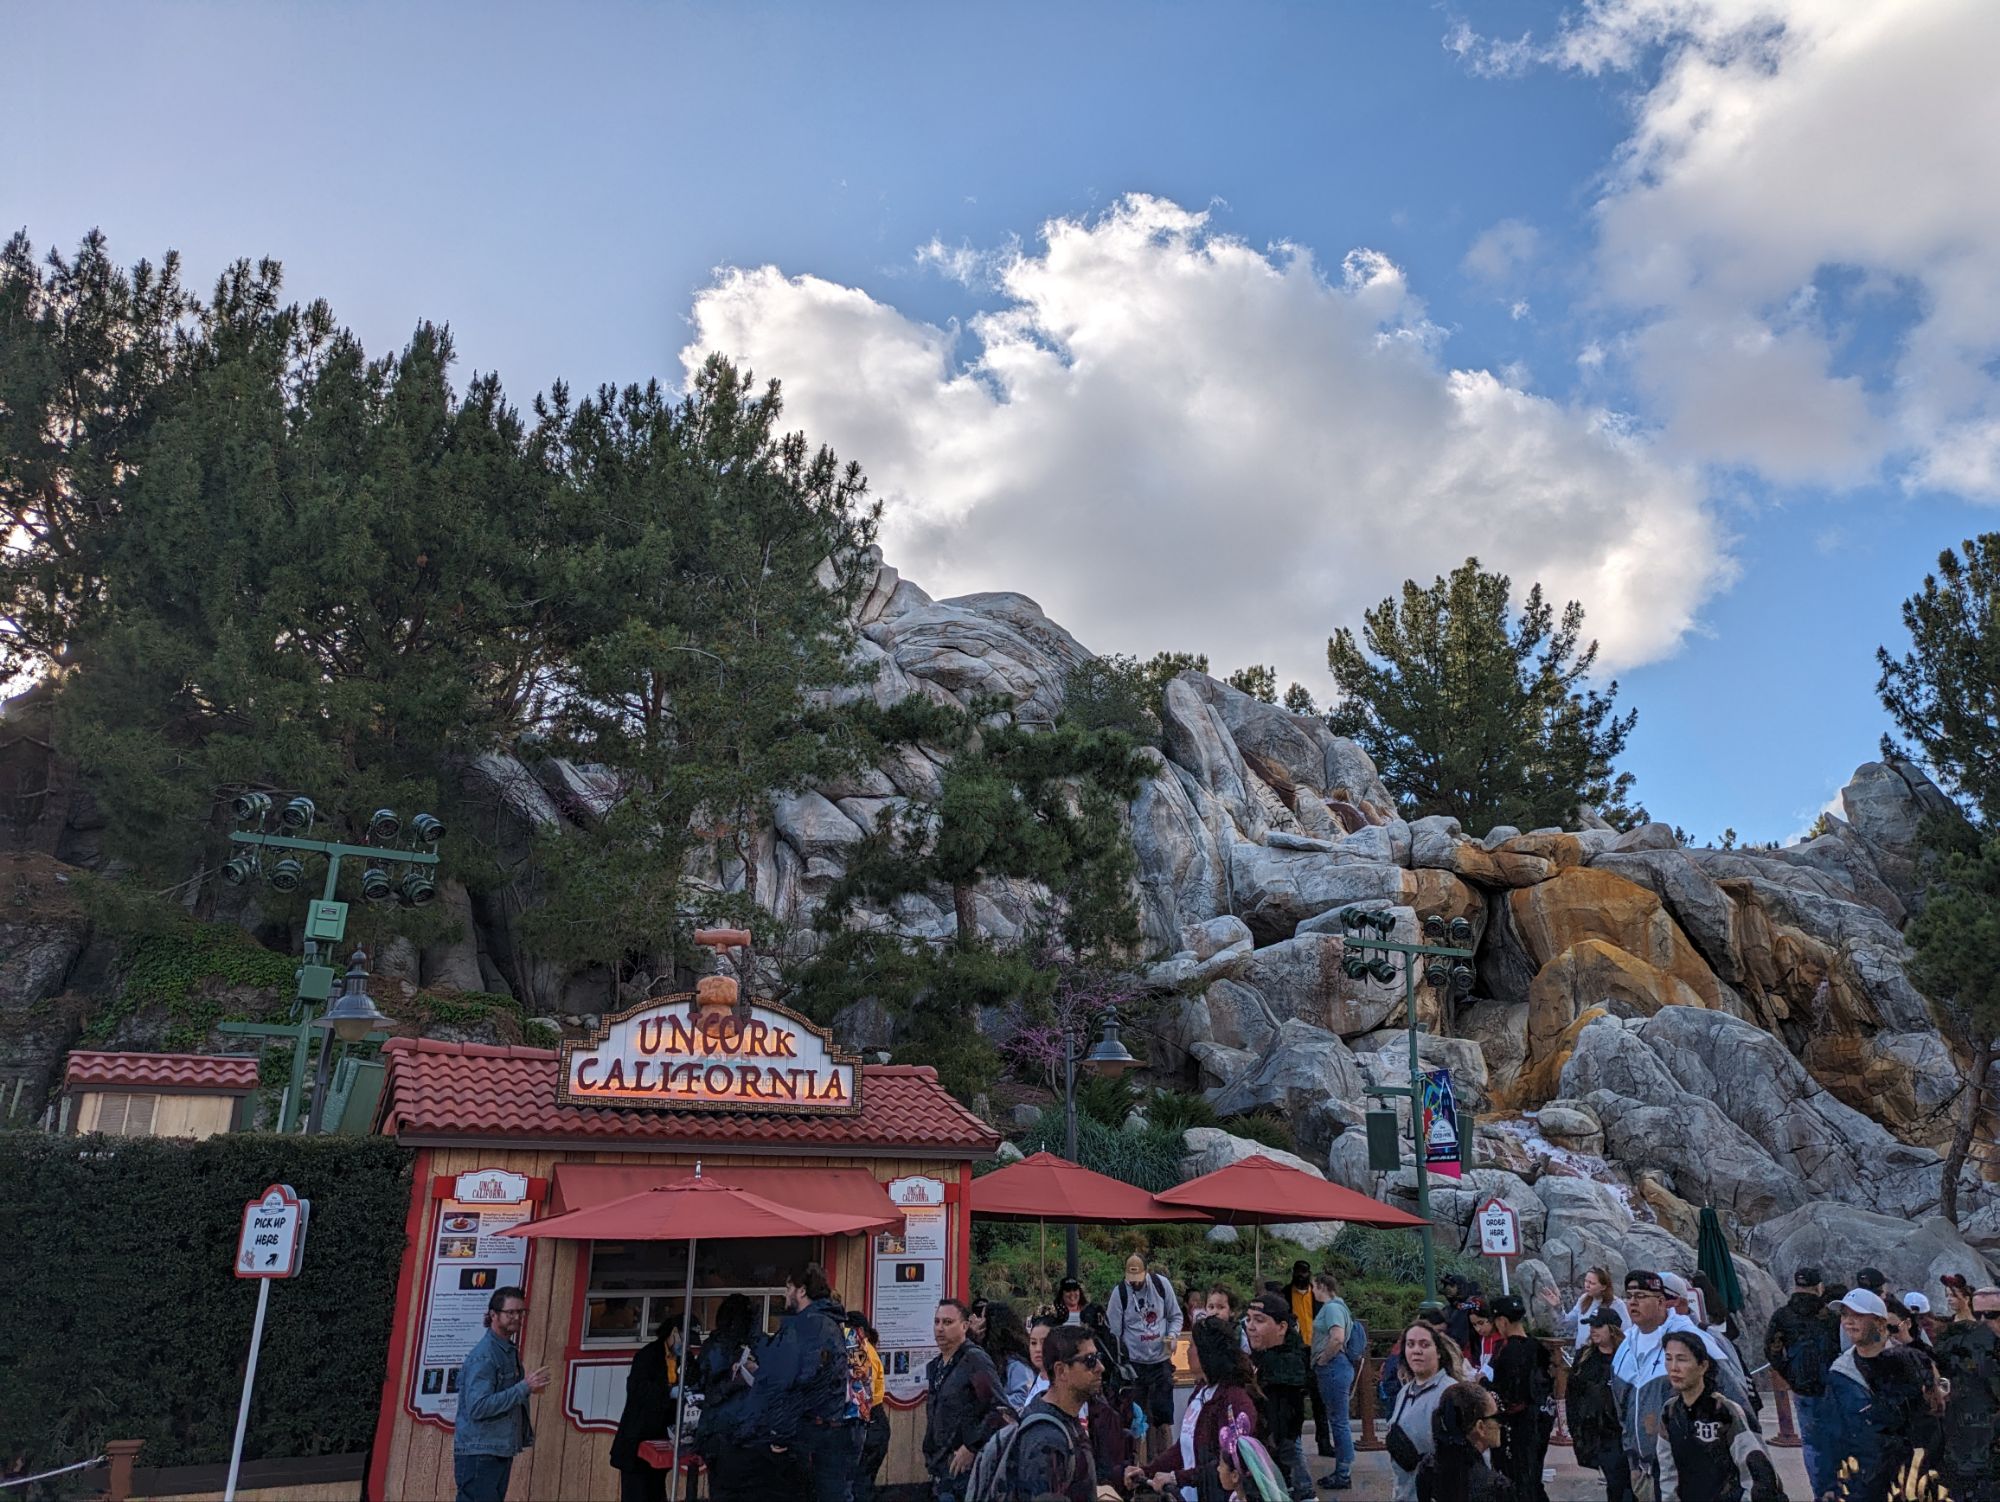 Grizzly Peak is the first thing you get to once you get past Main Street.